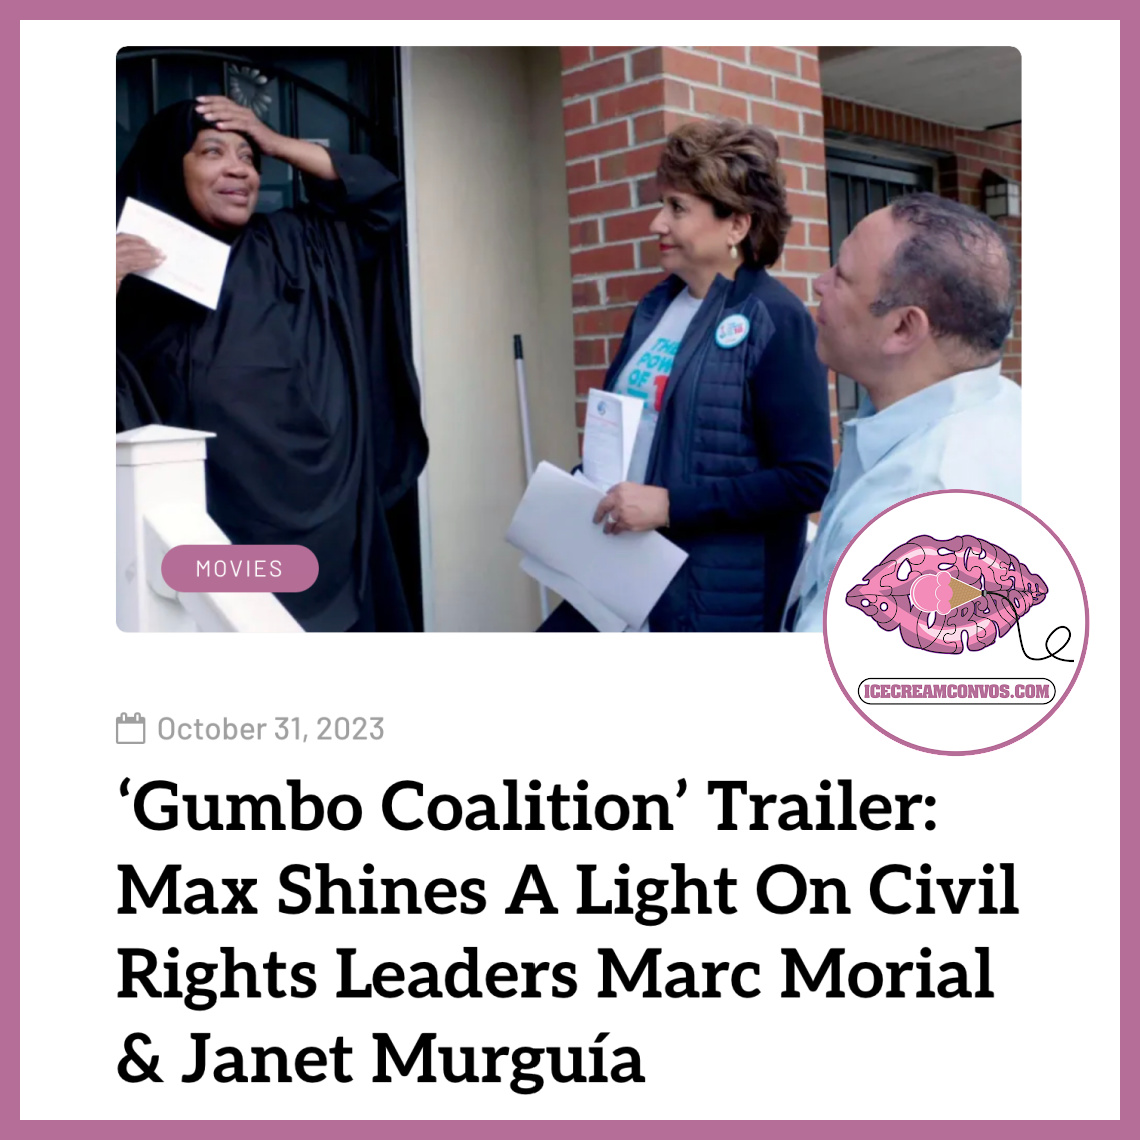 TRAILER: Follow two civil rights pioneers, Marc Morial, and Janet Murguía, as they build a better America in the documentary ‘Gumbo Coalition’. 🎥📺️🖤🍦 

Watch the trailer 👉🏾 bit.ly/3sbQjpr

#GumboCoalition #MarcMorial #JanetMurguia #Max #Documentary #IceCreamConvos